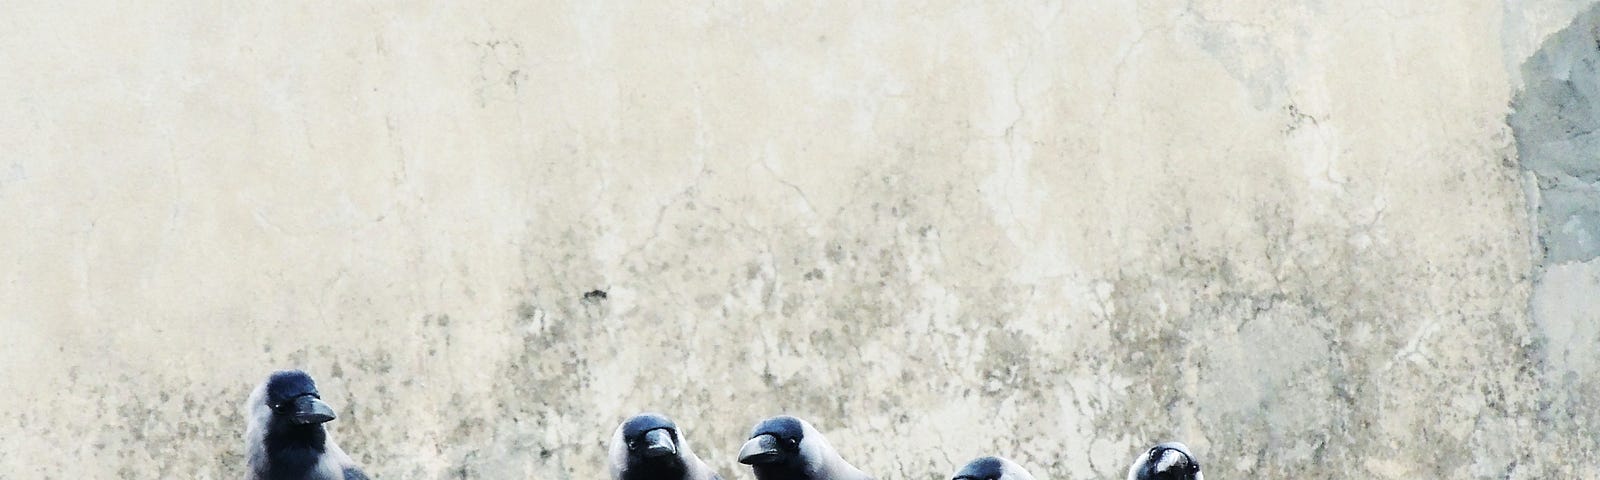 a gray day in background, five black crows stand on a cement ledge